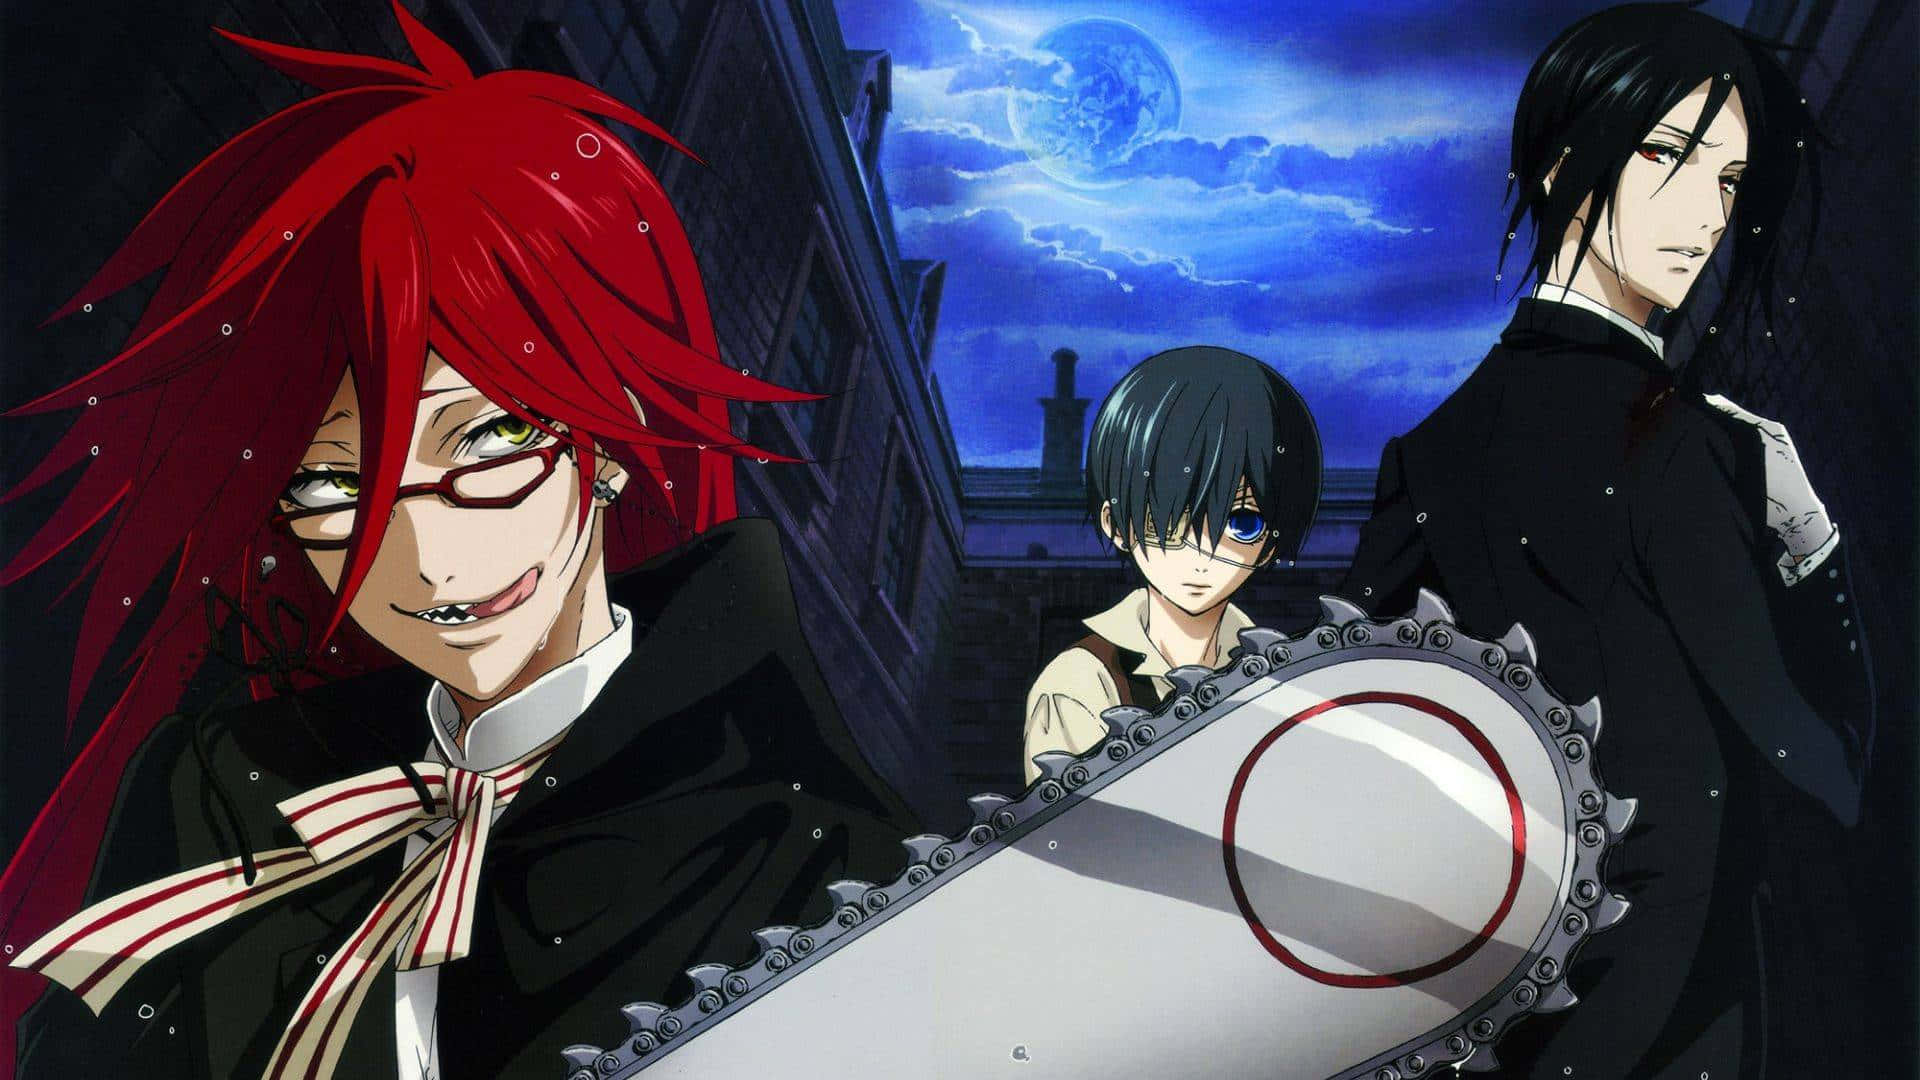 Welcome To The World of 'Black Butler'